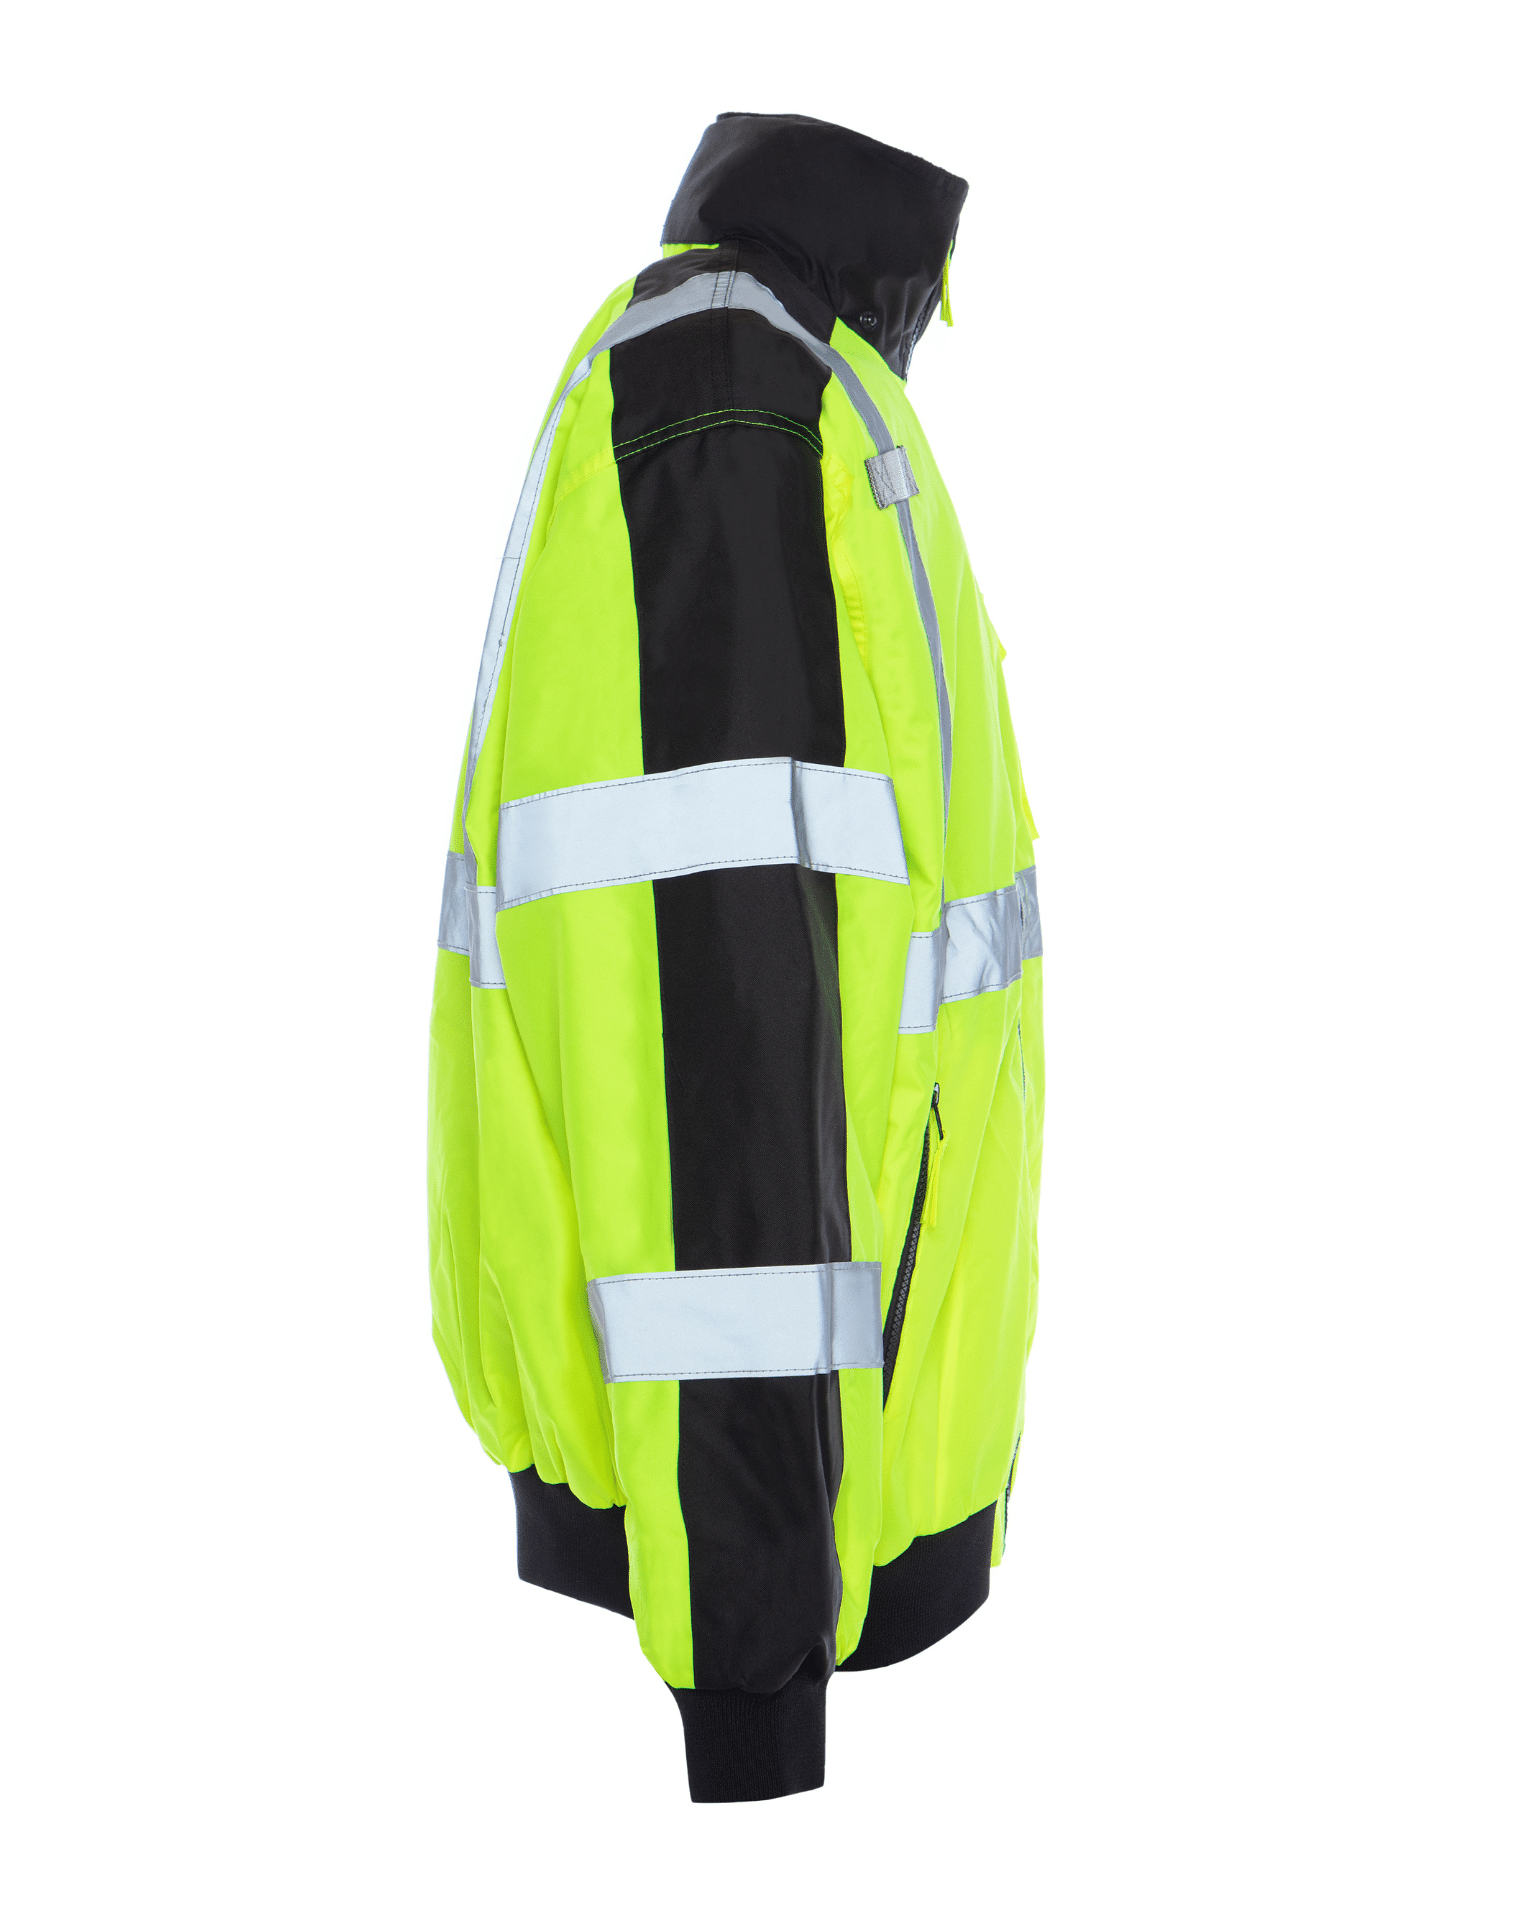 ANSI Class 3 High Visibility 3-Season versatile water and stain repellent bomber jacket by Utility Pro